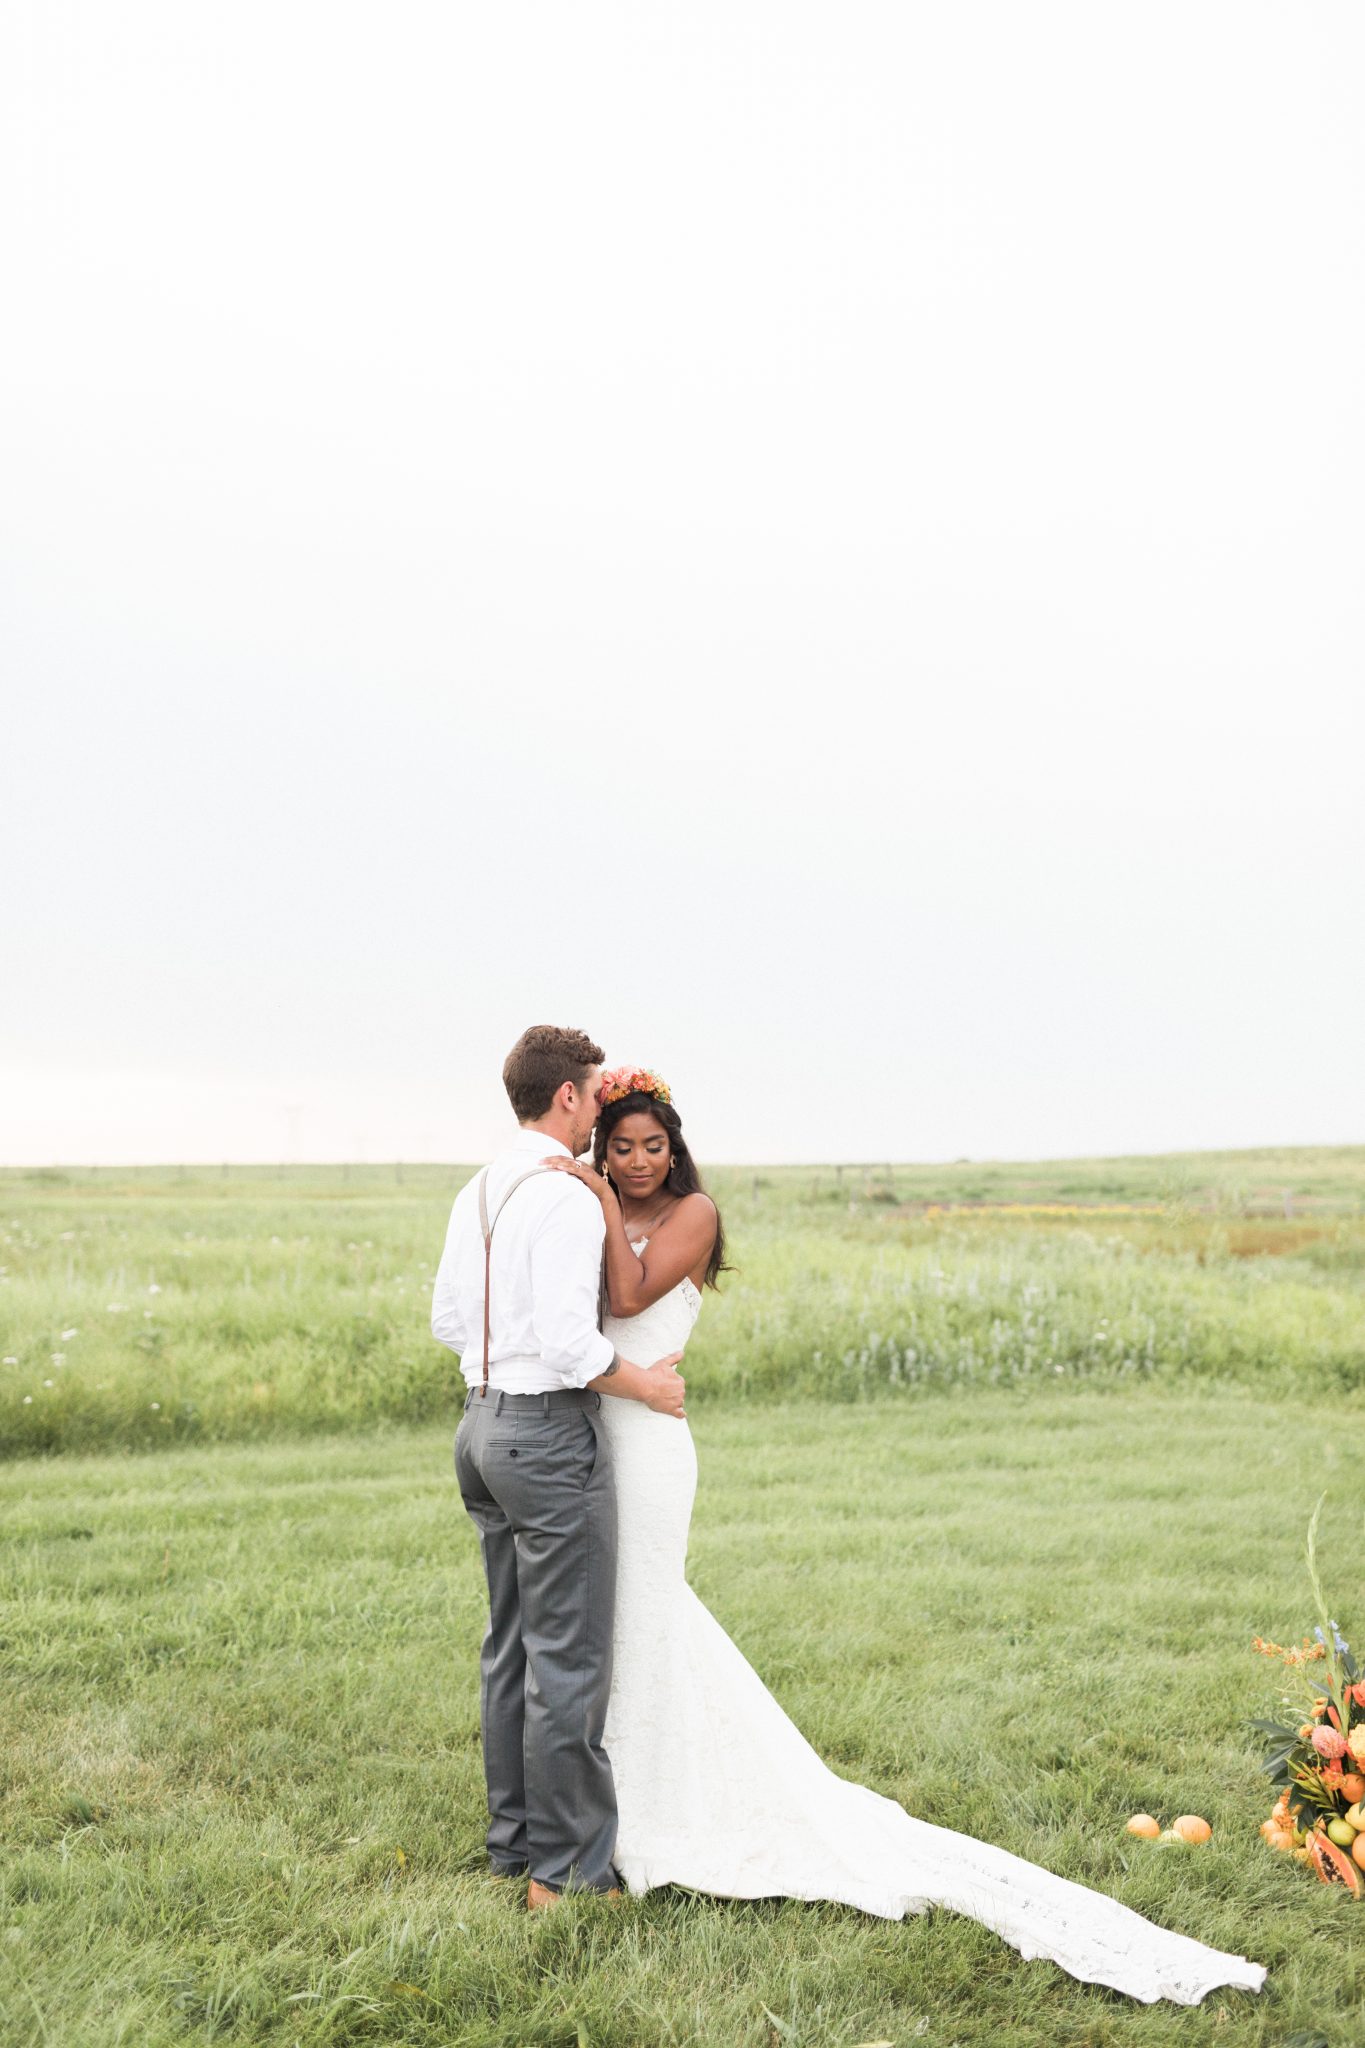 Bride and groom share a moment at The Gathered, a countryside venue in Southern Alberta